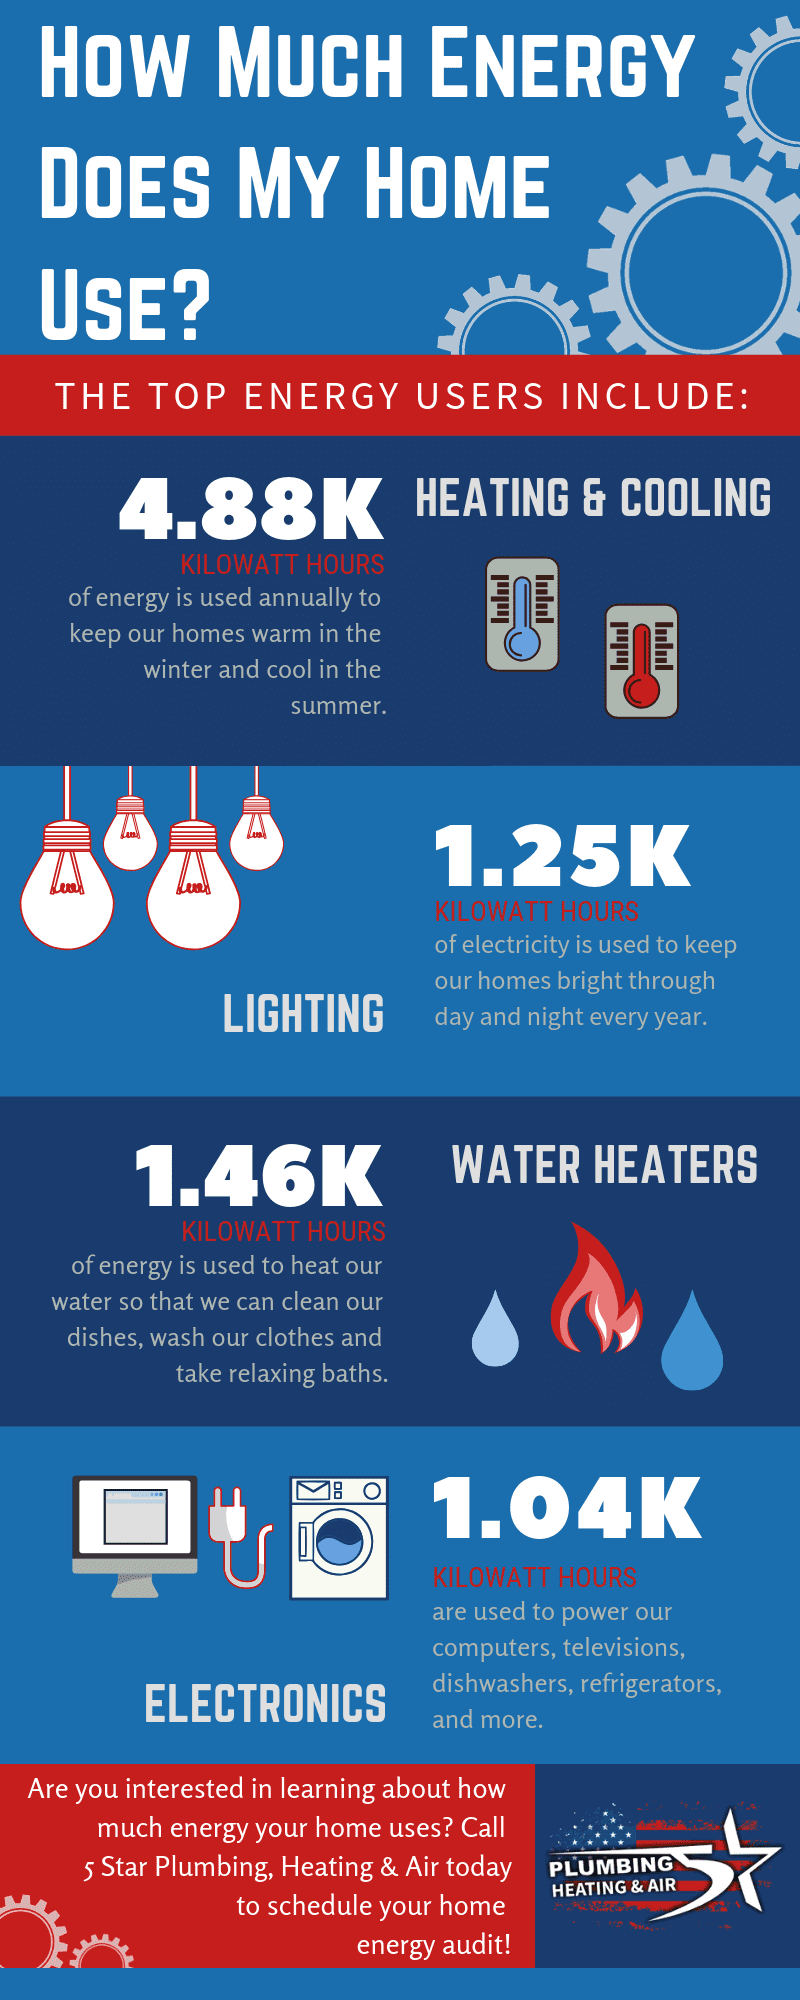 A breakdown of how much energy the average home uses